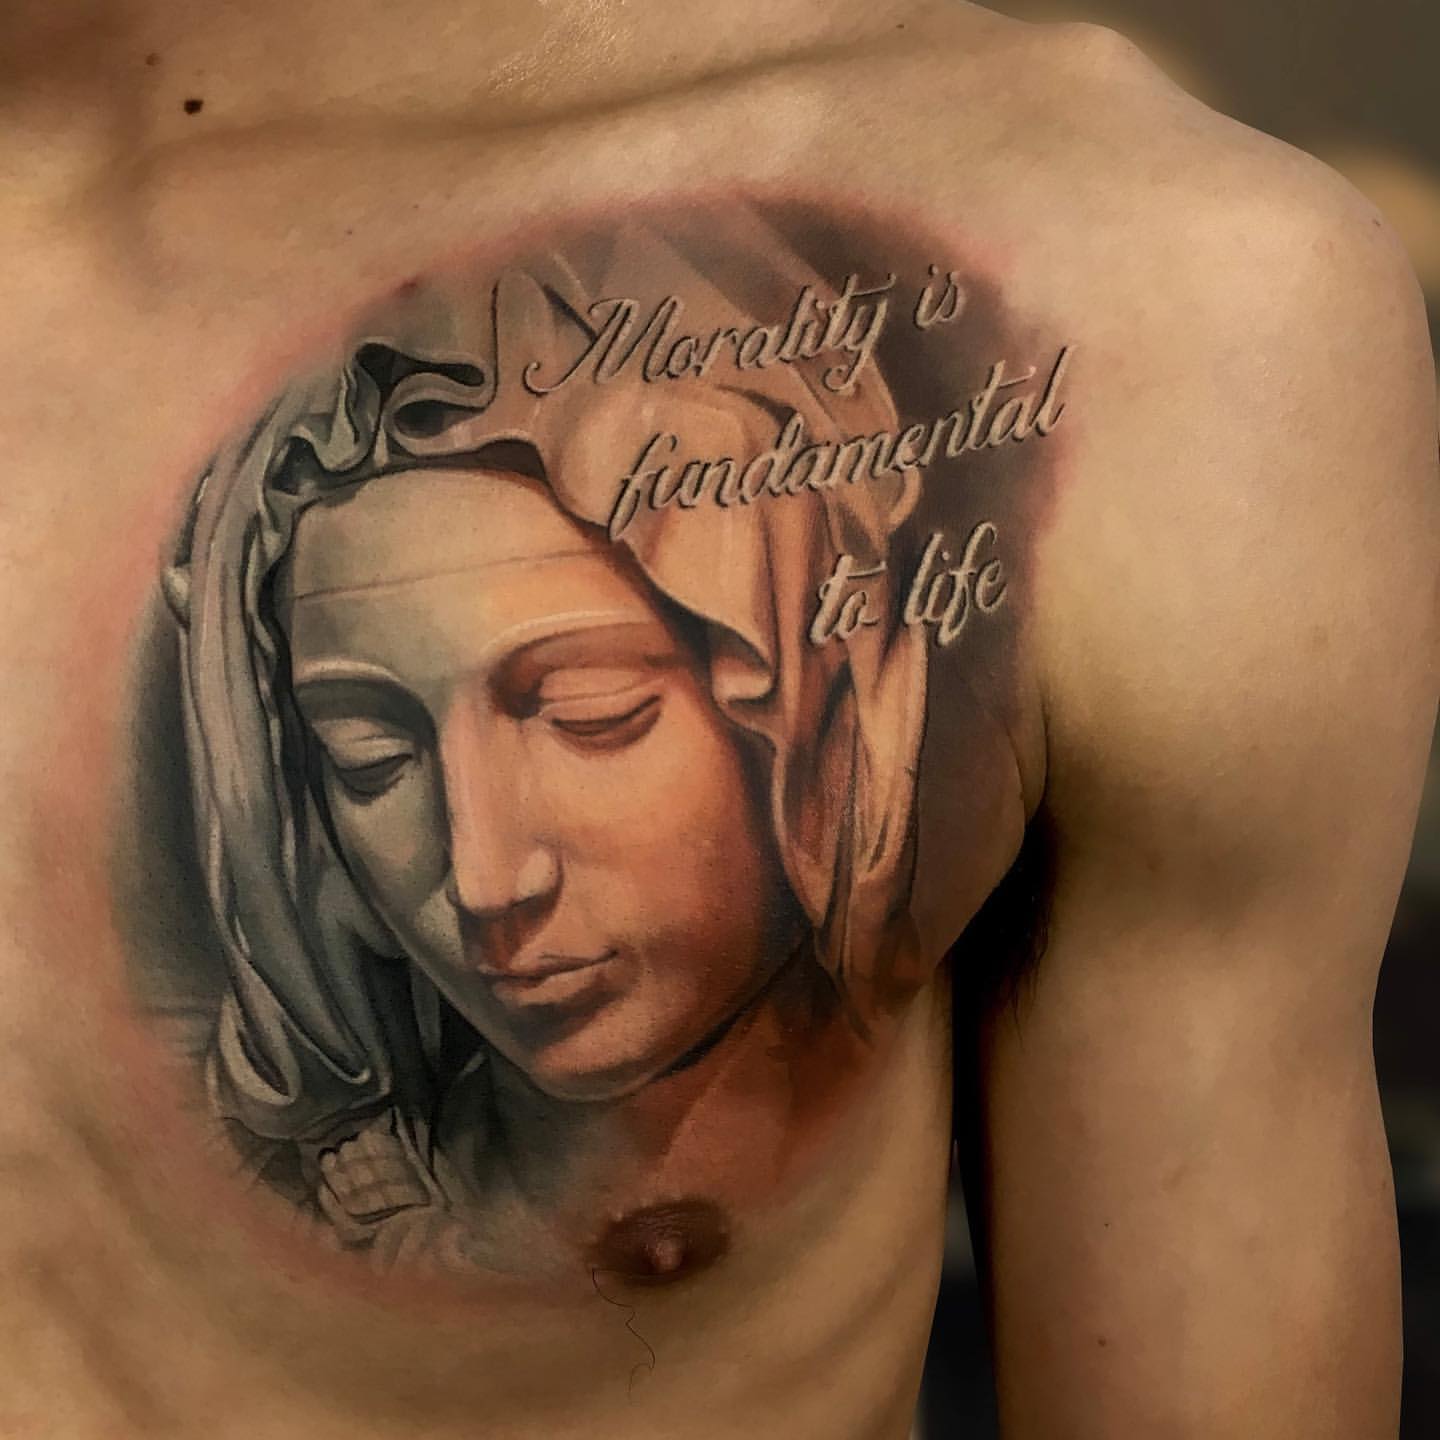 The Enchanted Catholic World of Tattoo Artists - April Online